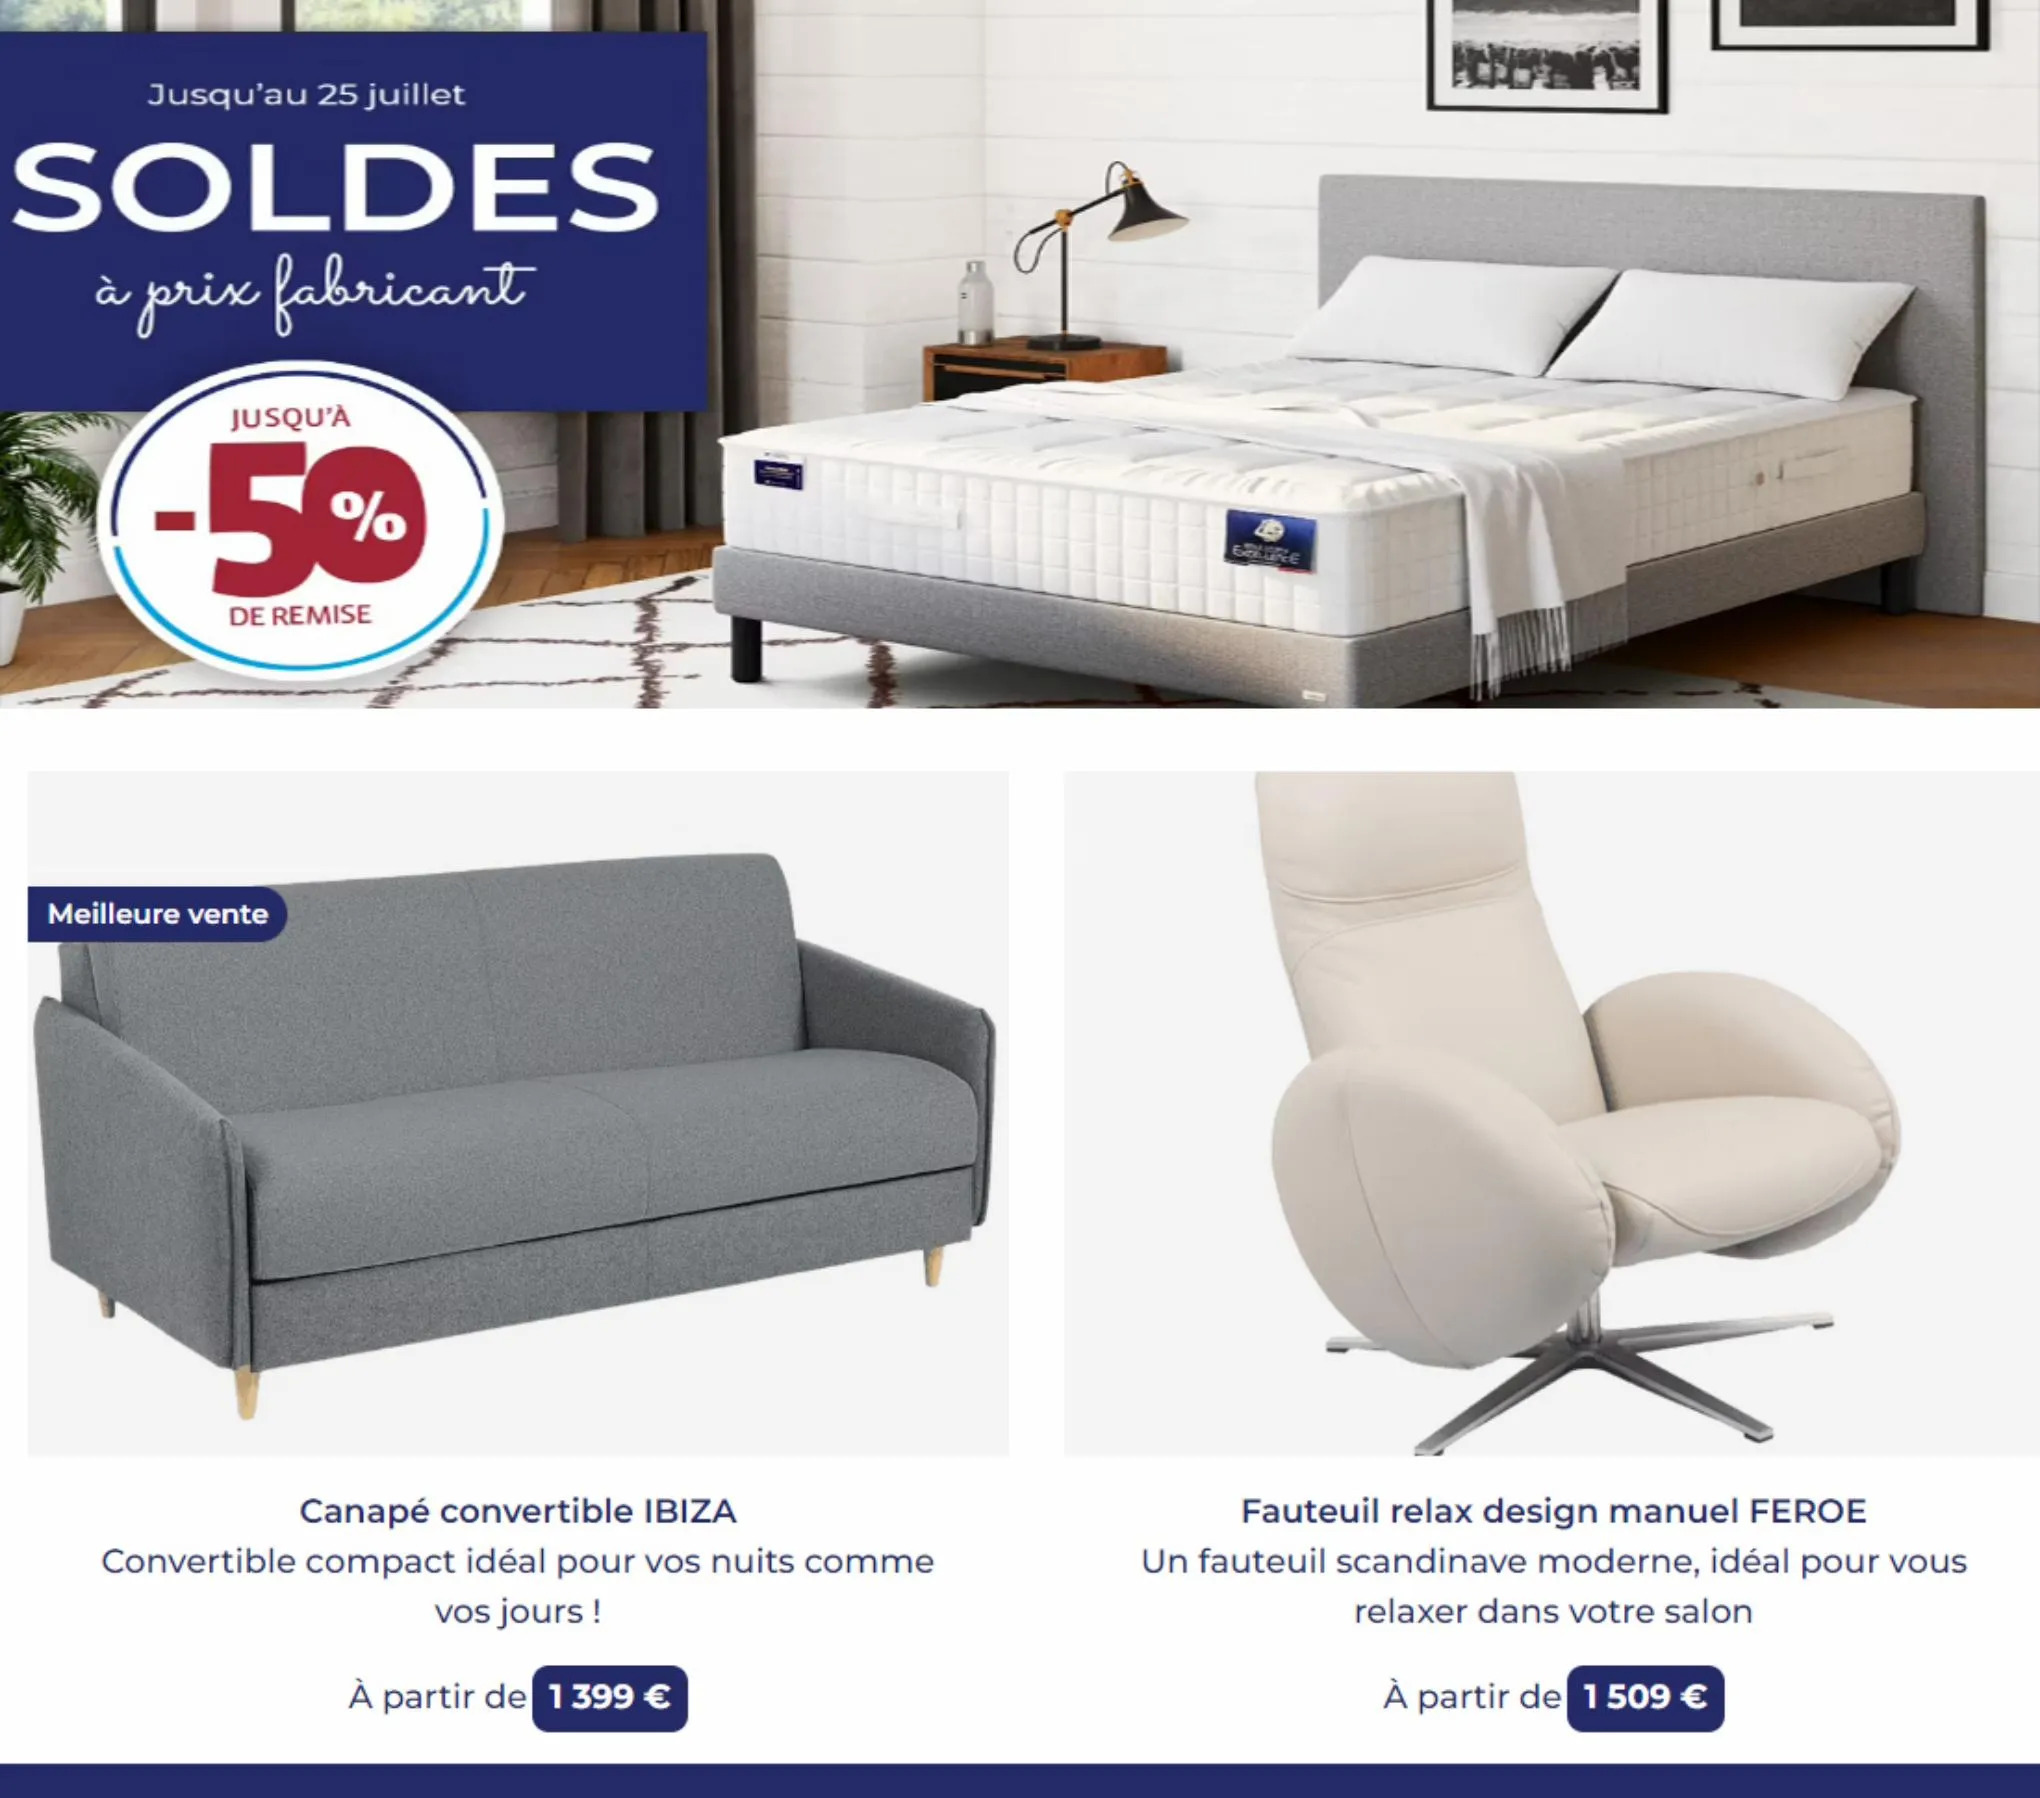 Catalogue Soldes a prix fabricant, page 00002